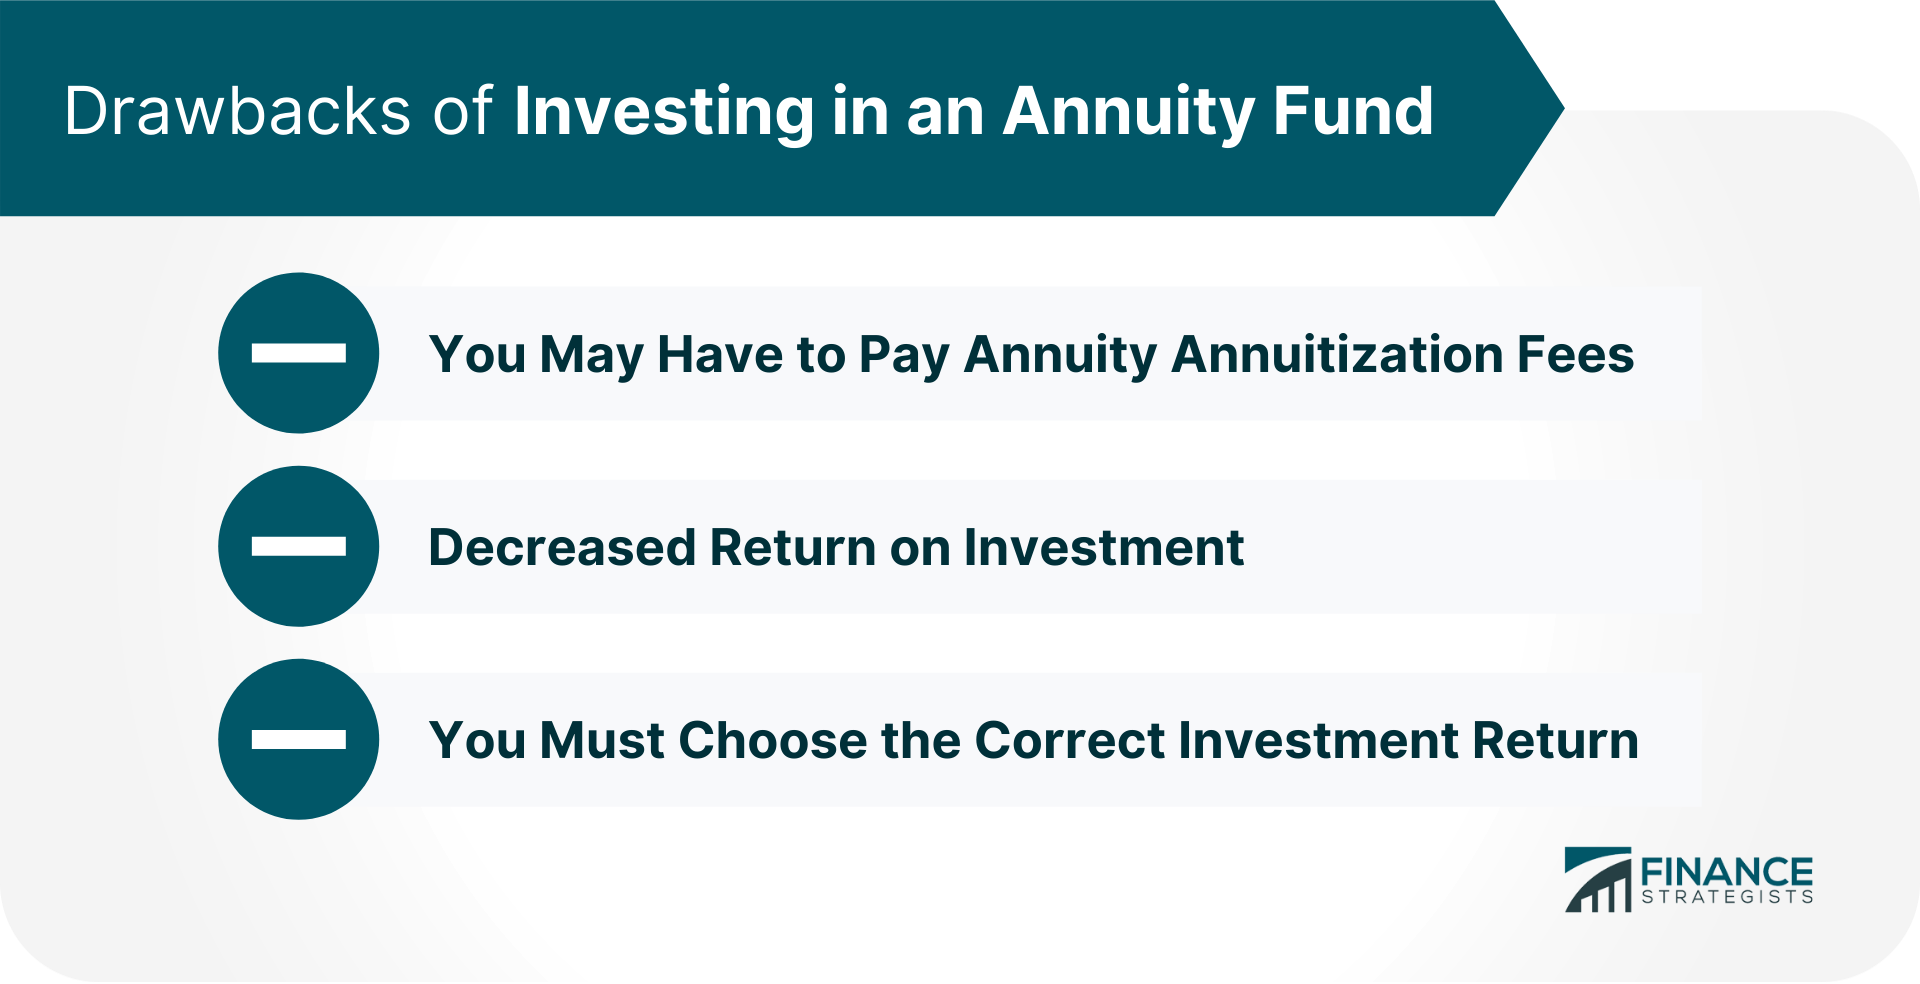 Drawbacks_of_Investing_in_an_Annuity_Fund_